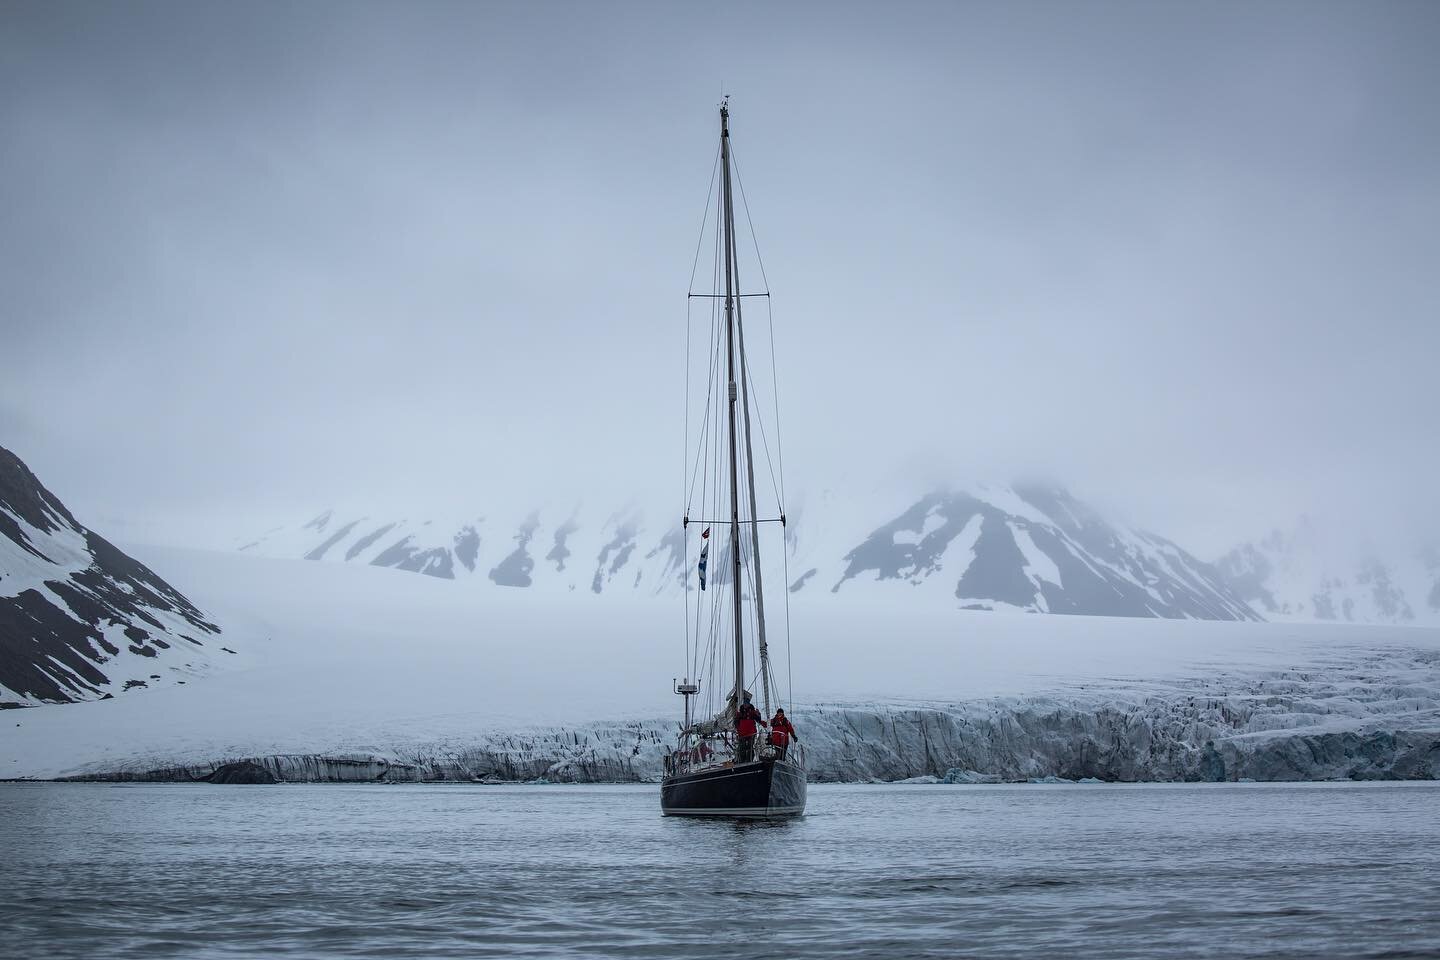 It&rsquo;s always really nice to see your images put to good use as a photographer! So it&rsquo;s great to see the cover and plenty of interior shots being used for @sailoramtrup new edition of Sail to Svalbard :) 

If you&rsquo;re an aspiring arctic